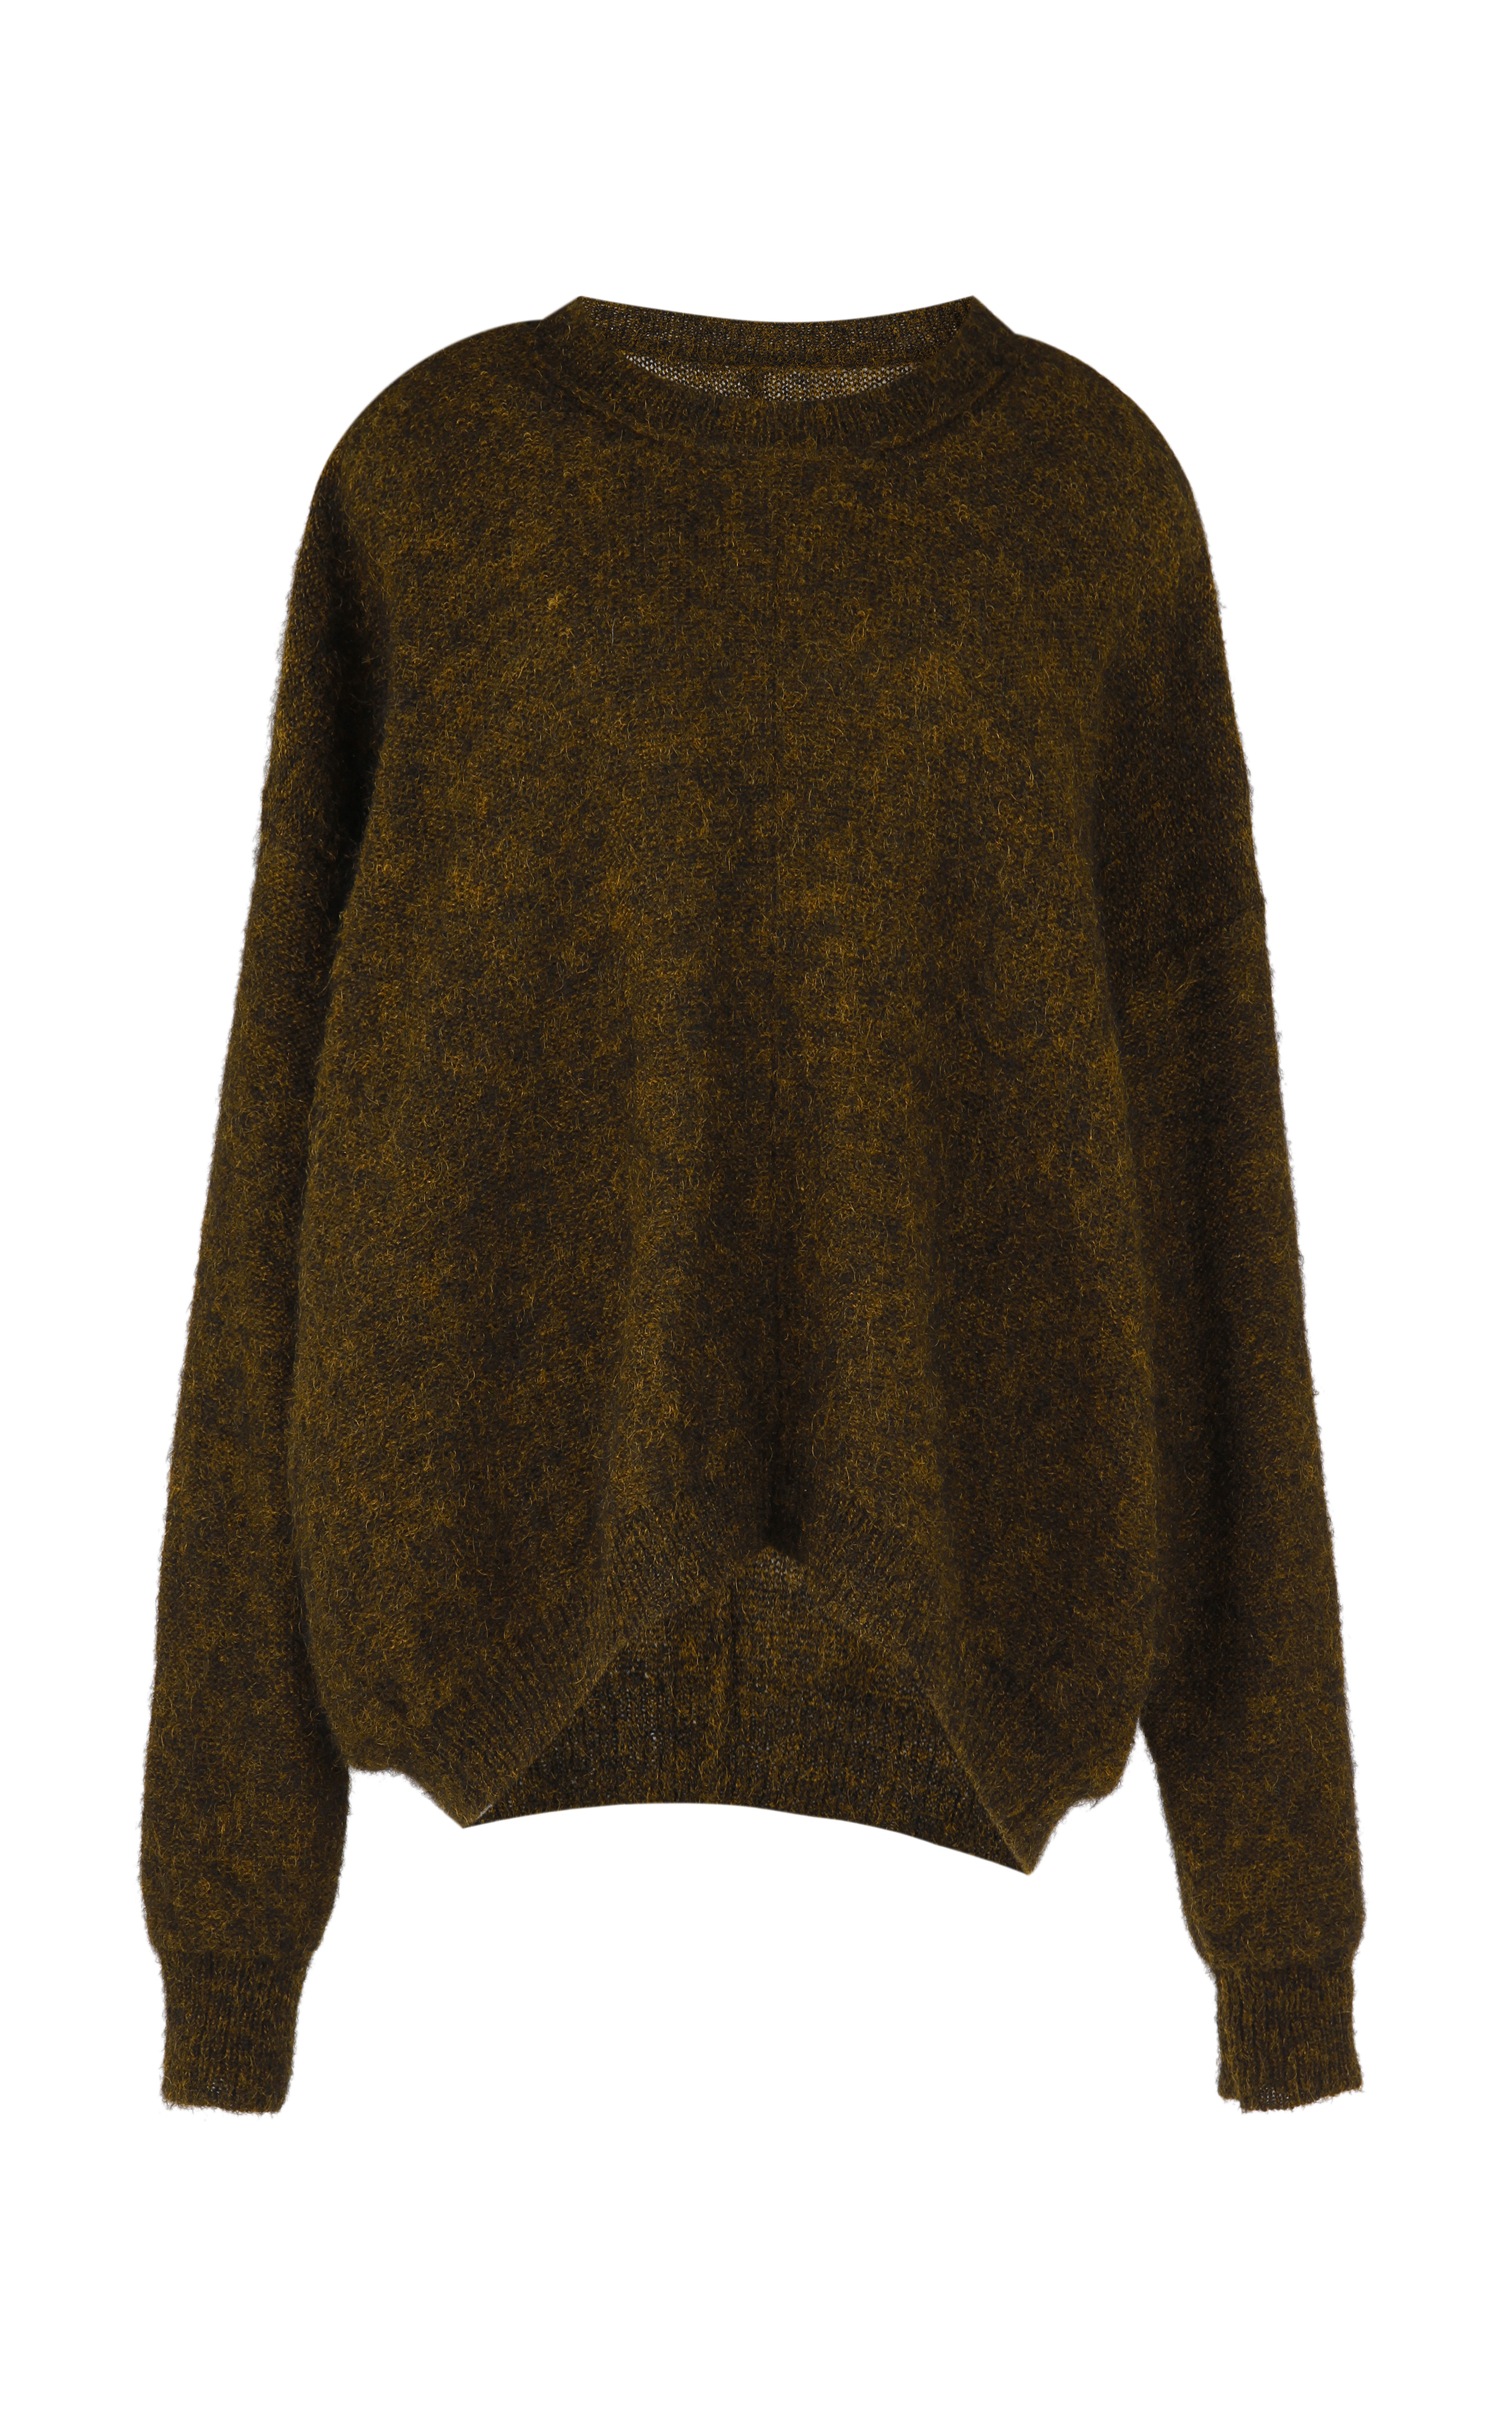 Lyst - Isabel Marant Tam Sweater in Natural